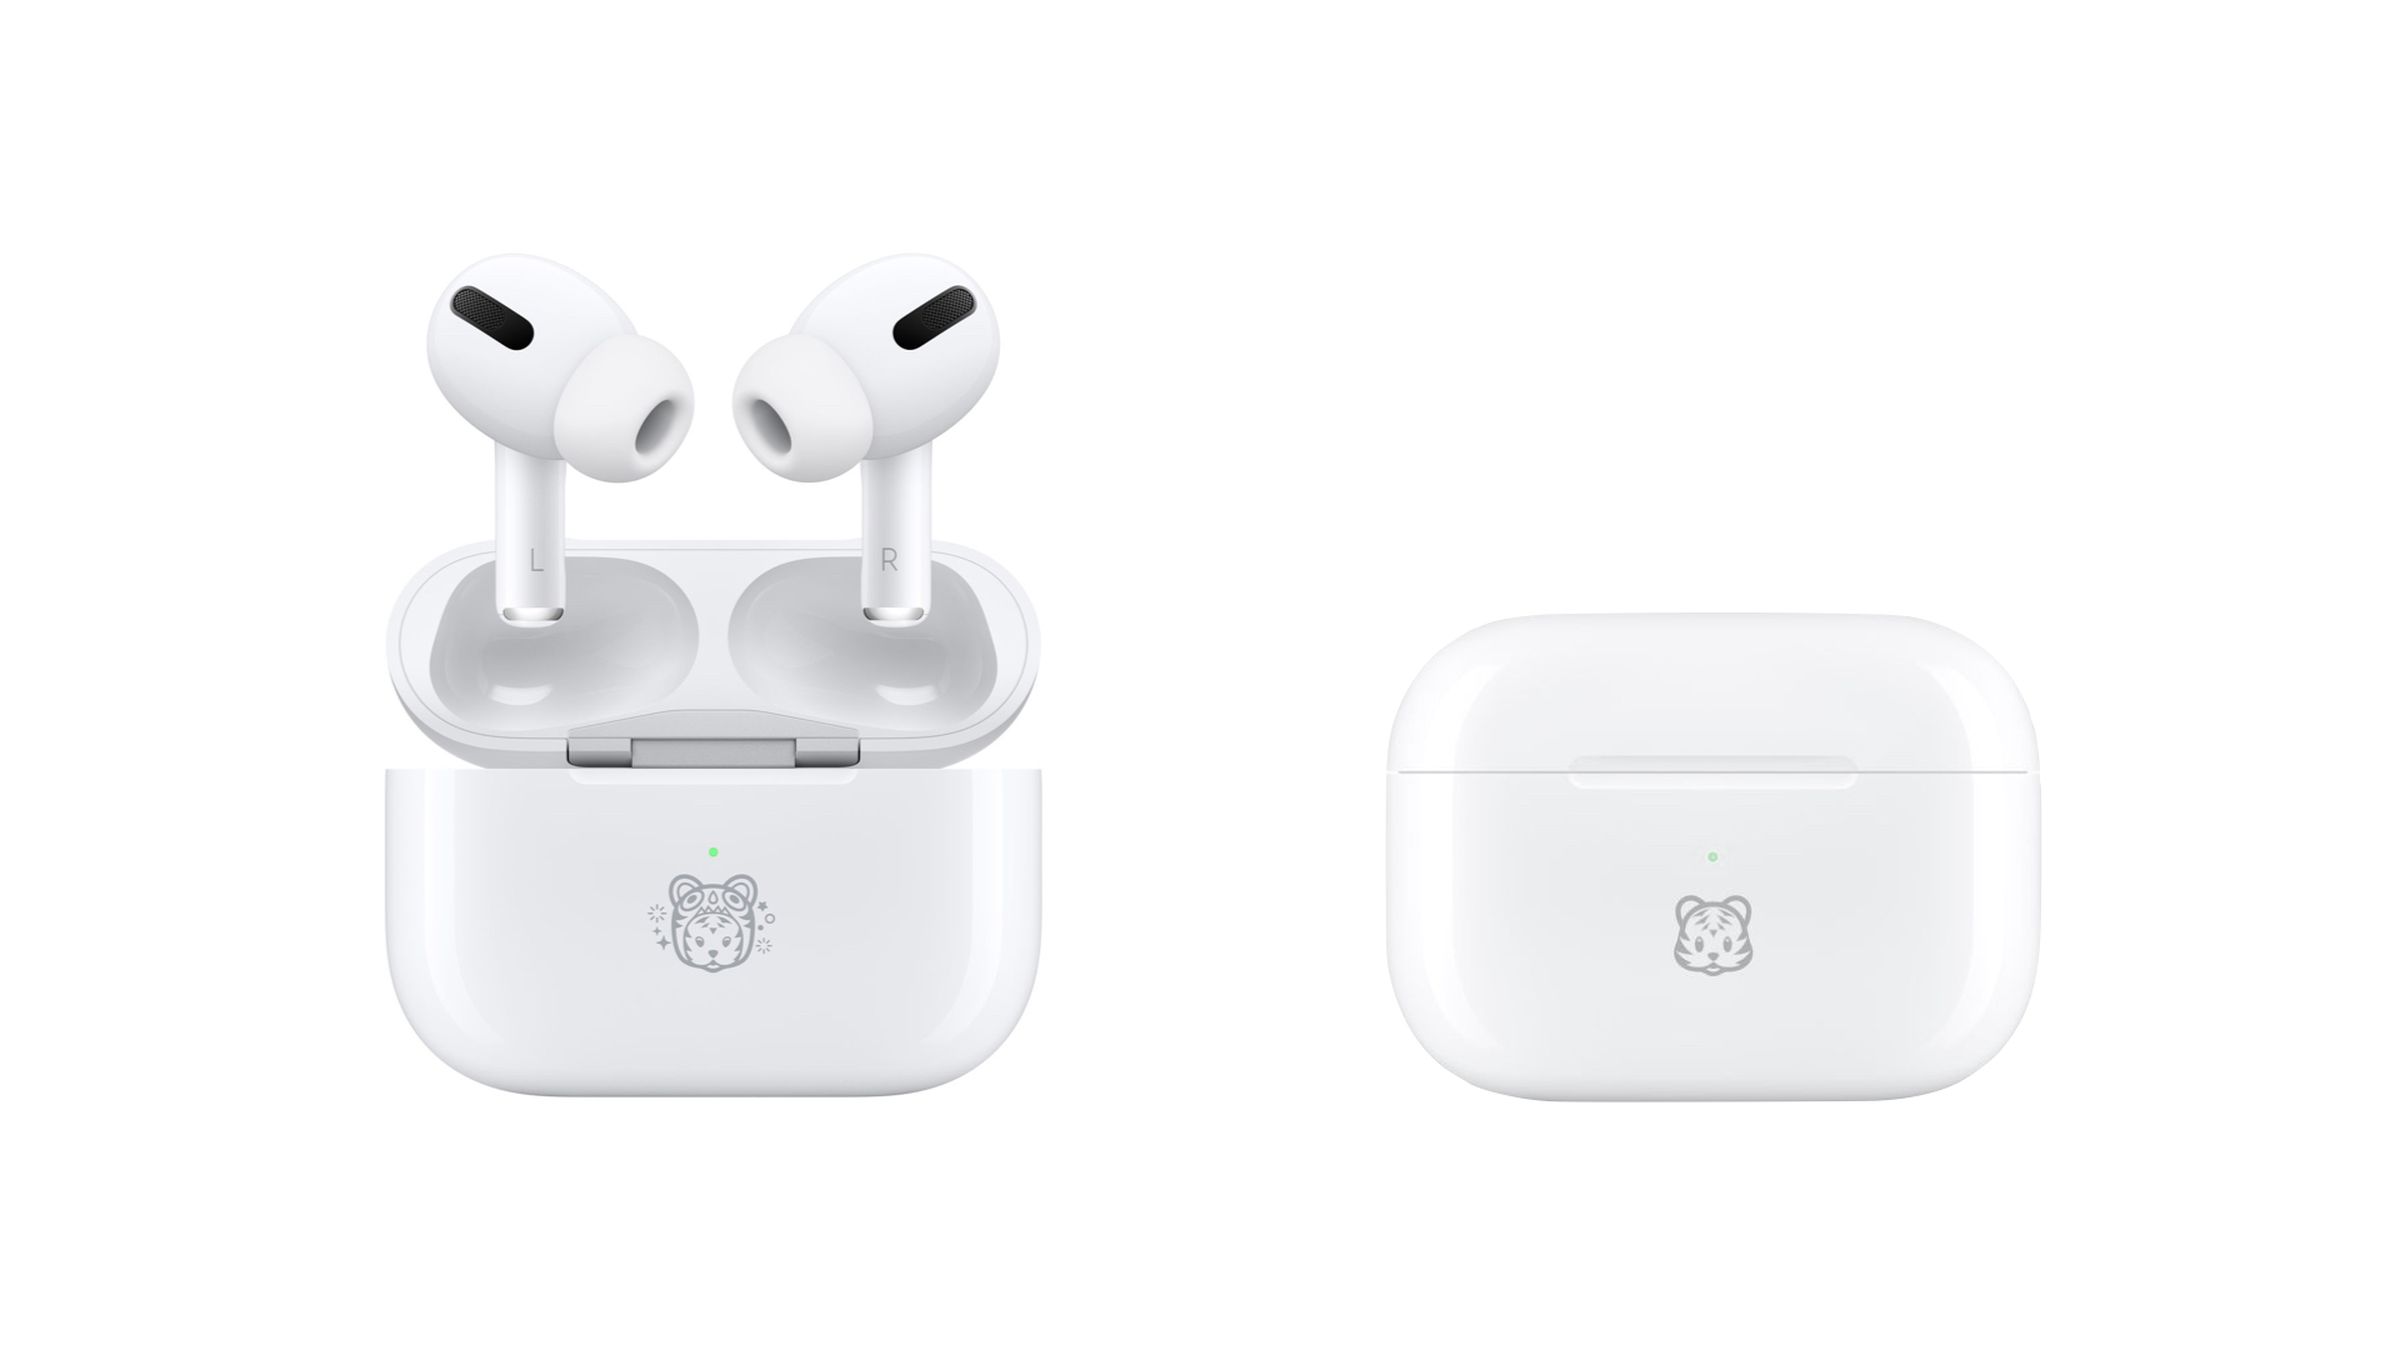 New special edition Year of the Tiger AirPods on the left comparing to AirPods Pro with a regular tiger emoji on the right.